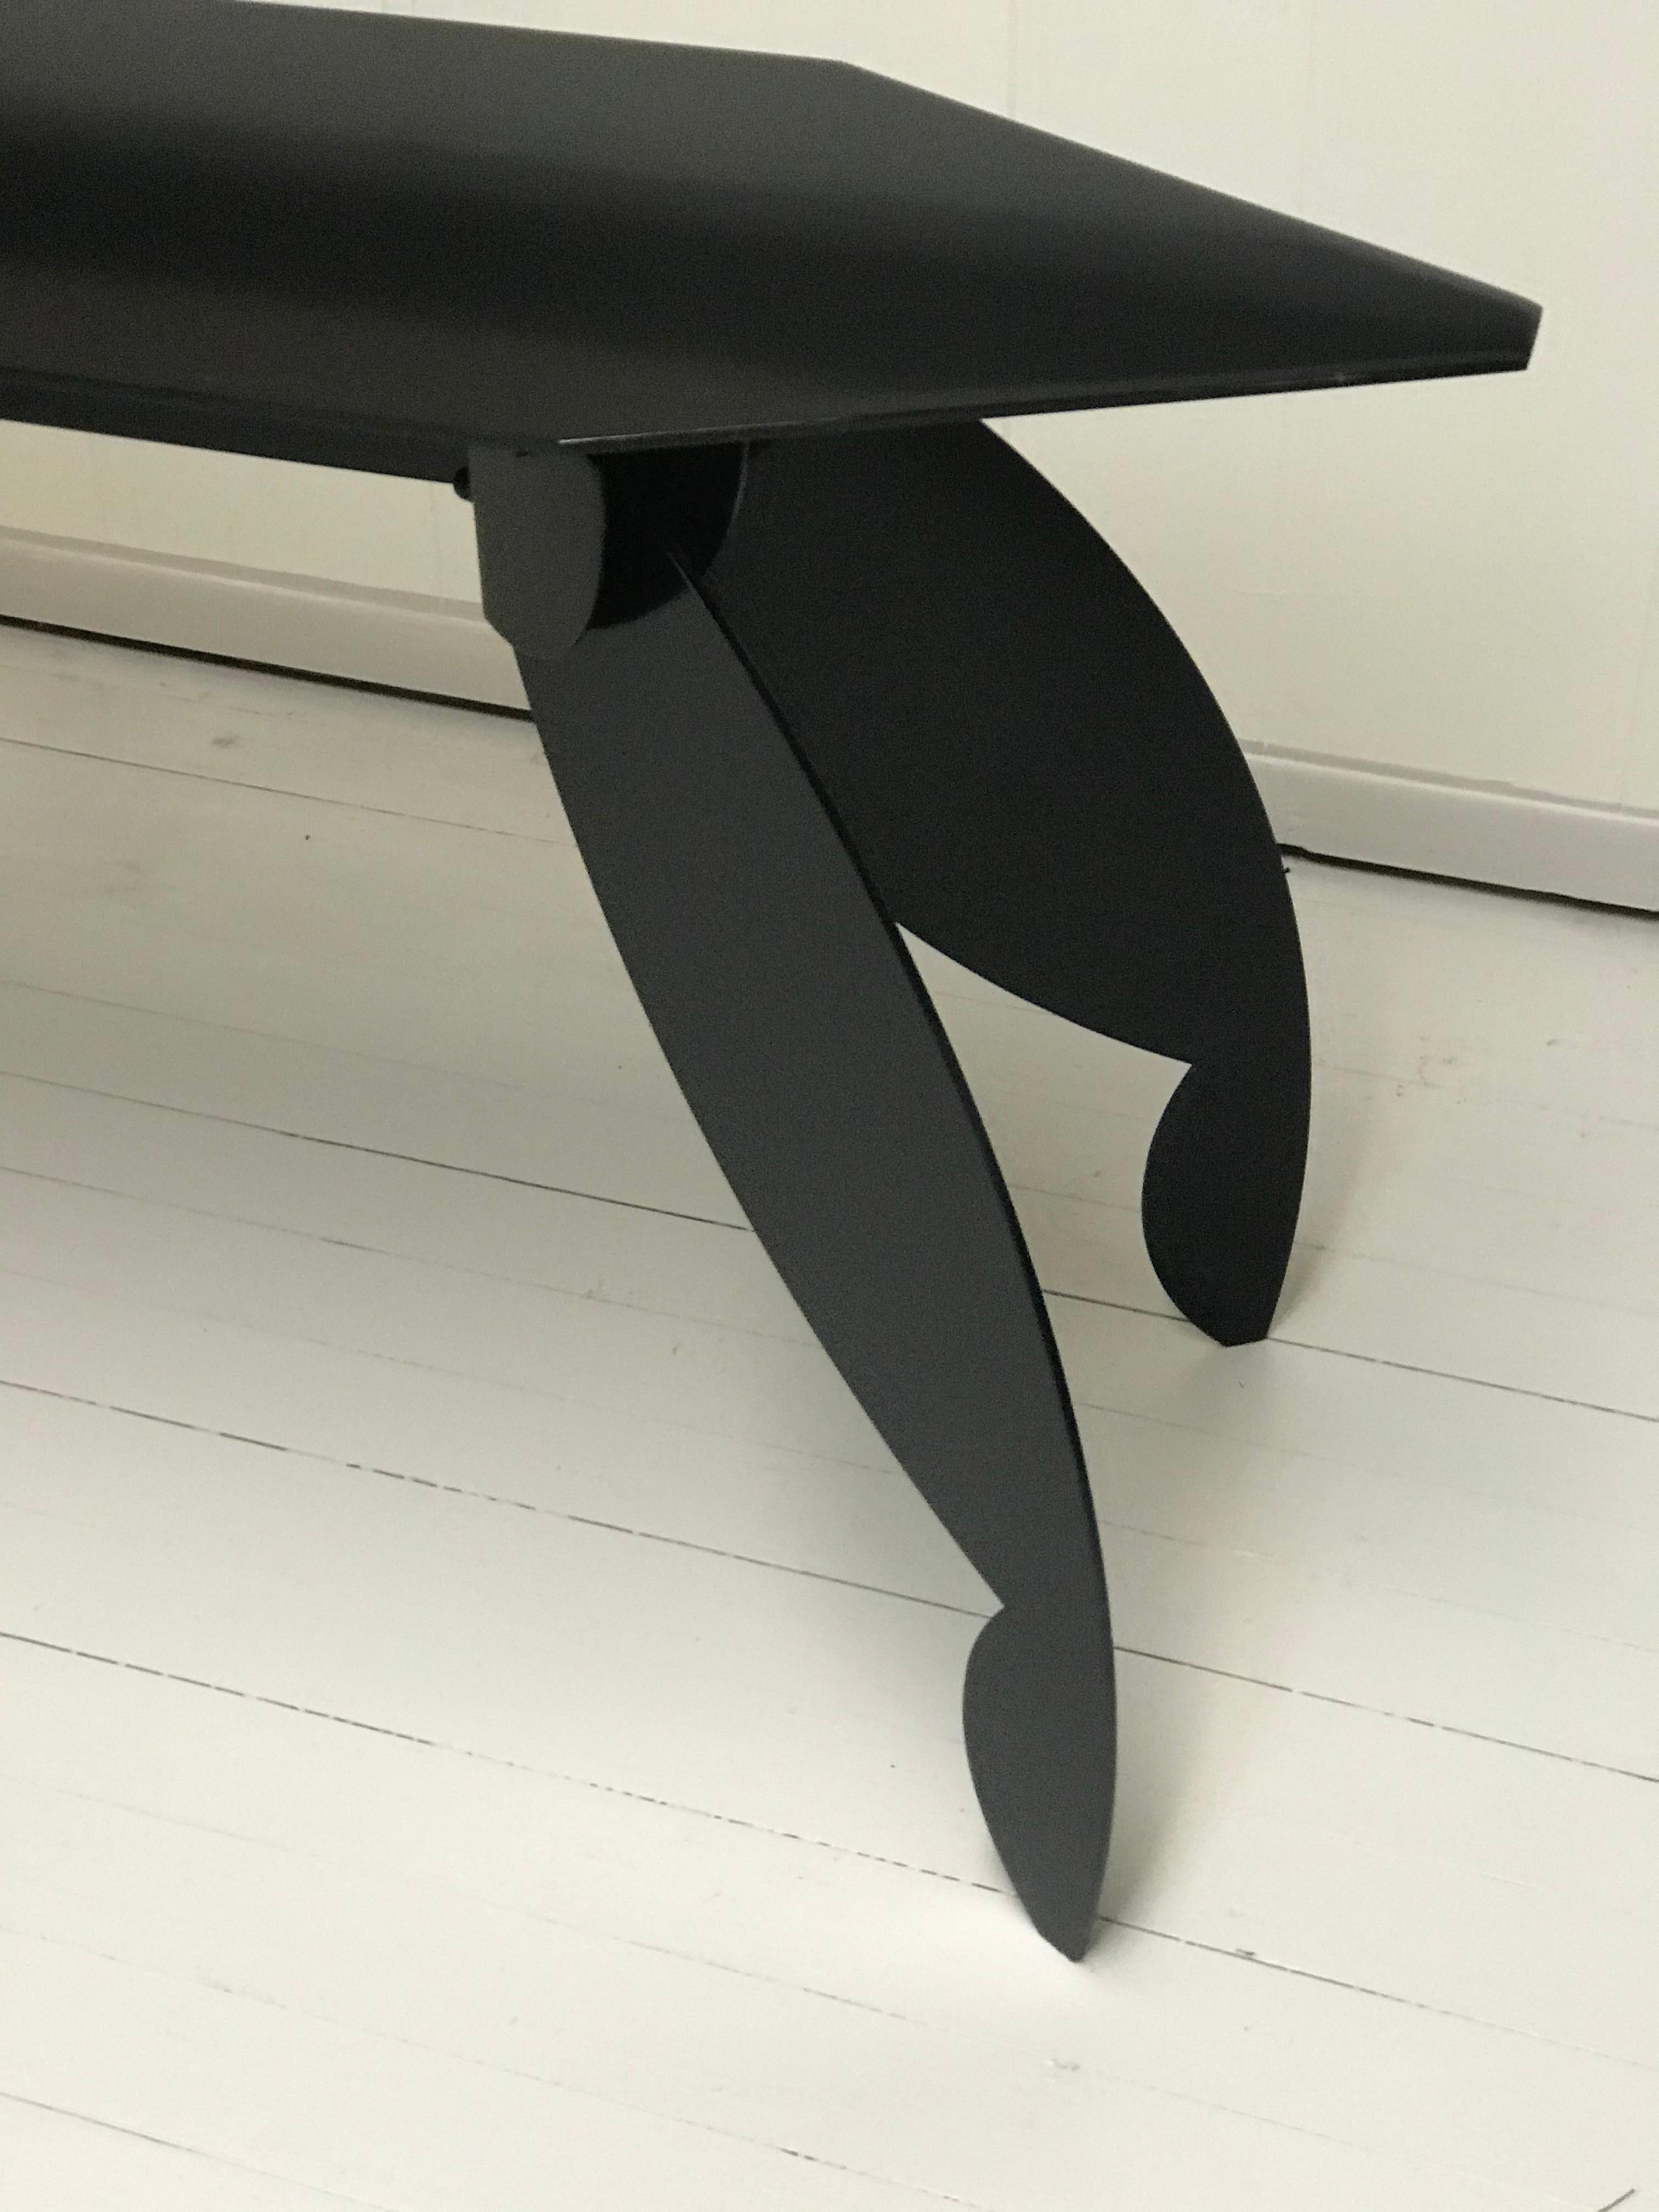 Architectural Black Lacquered Steel Console In Excellent Condition For Sale In Pasadena, CA